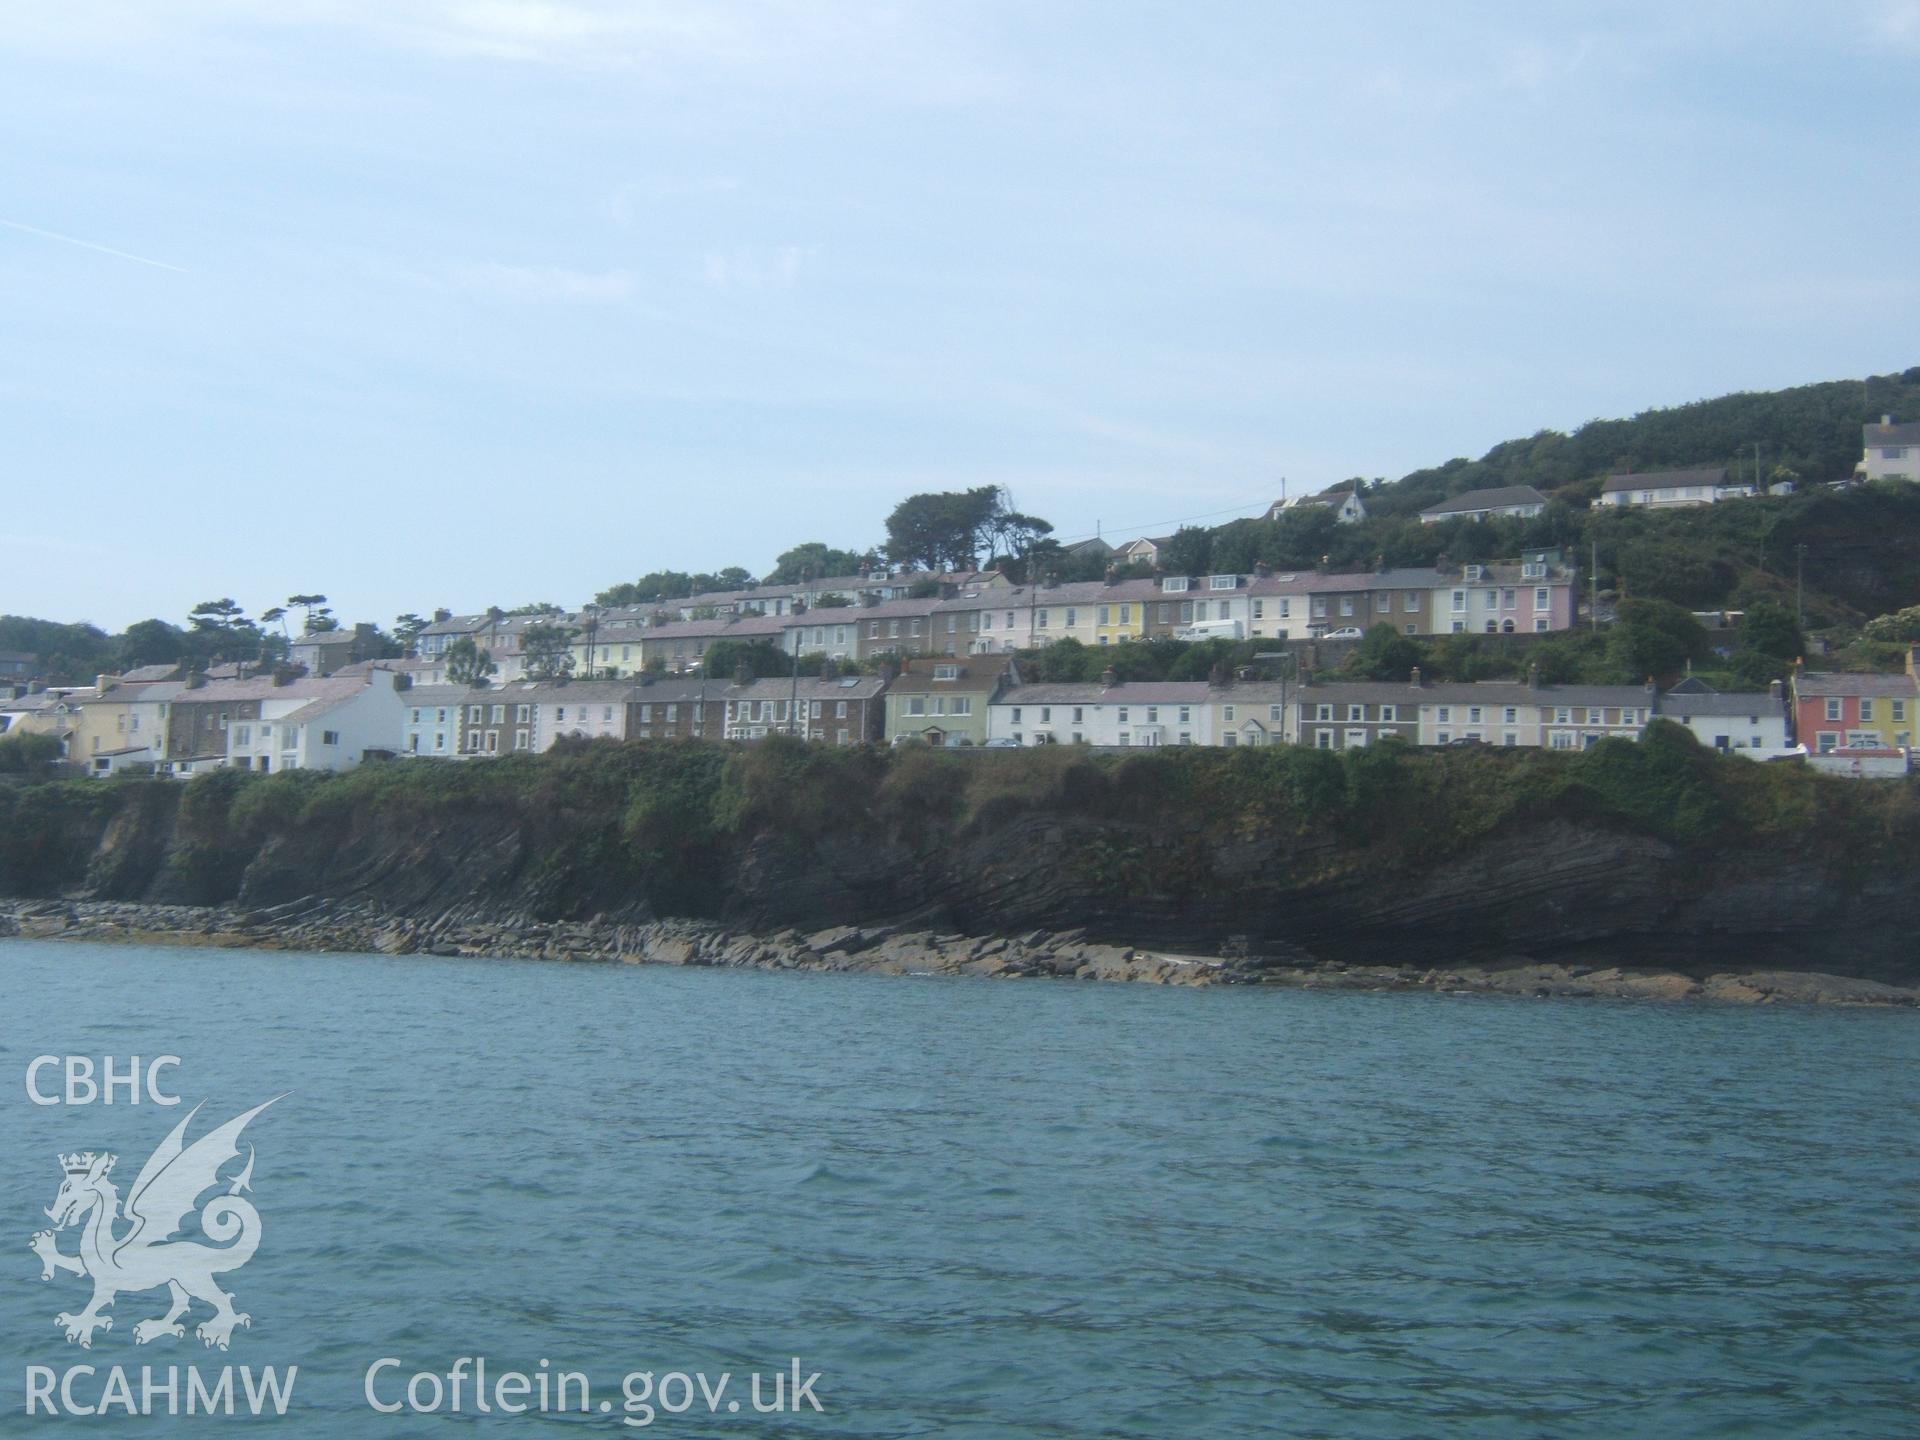 The three northern Newquay Terraces from the sea (east).